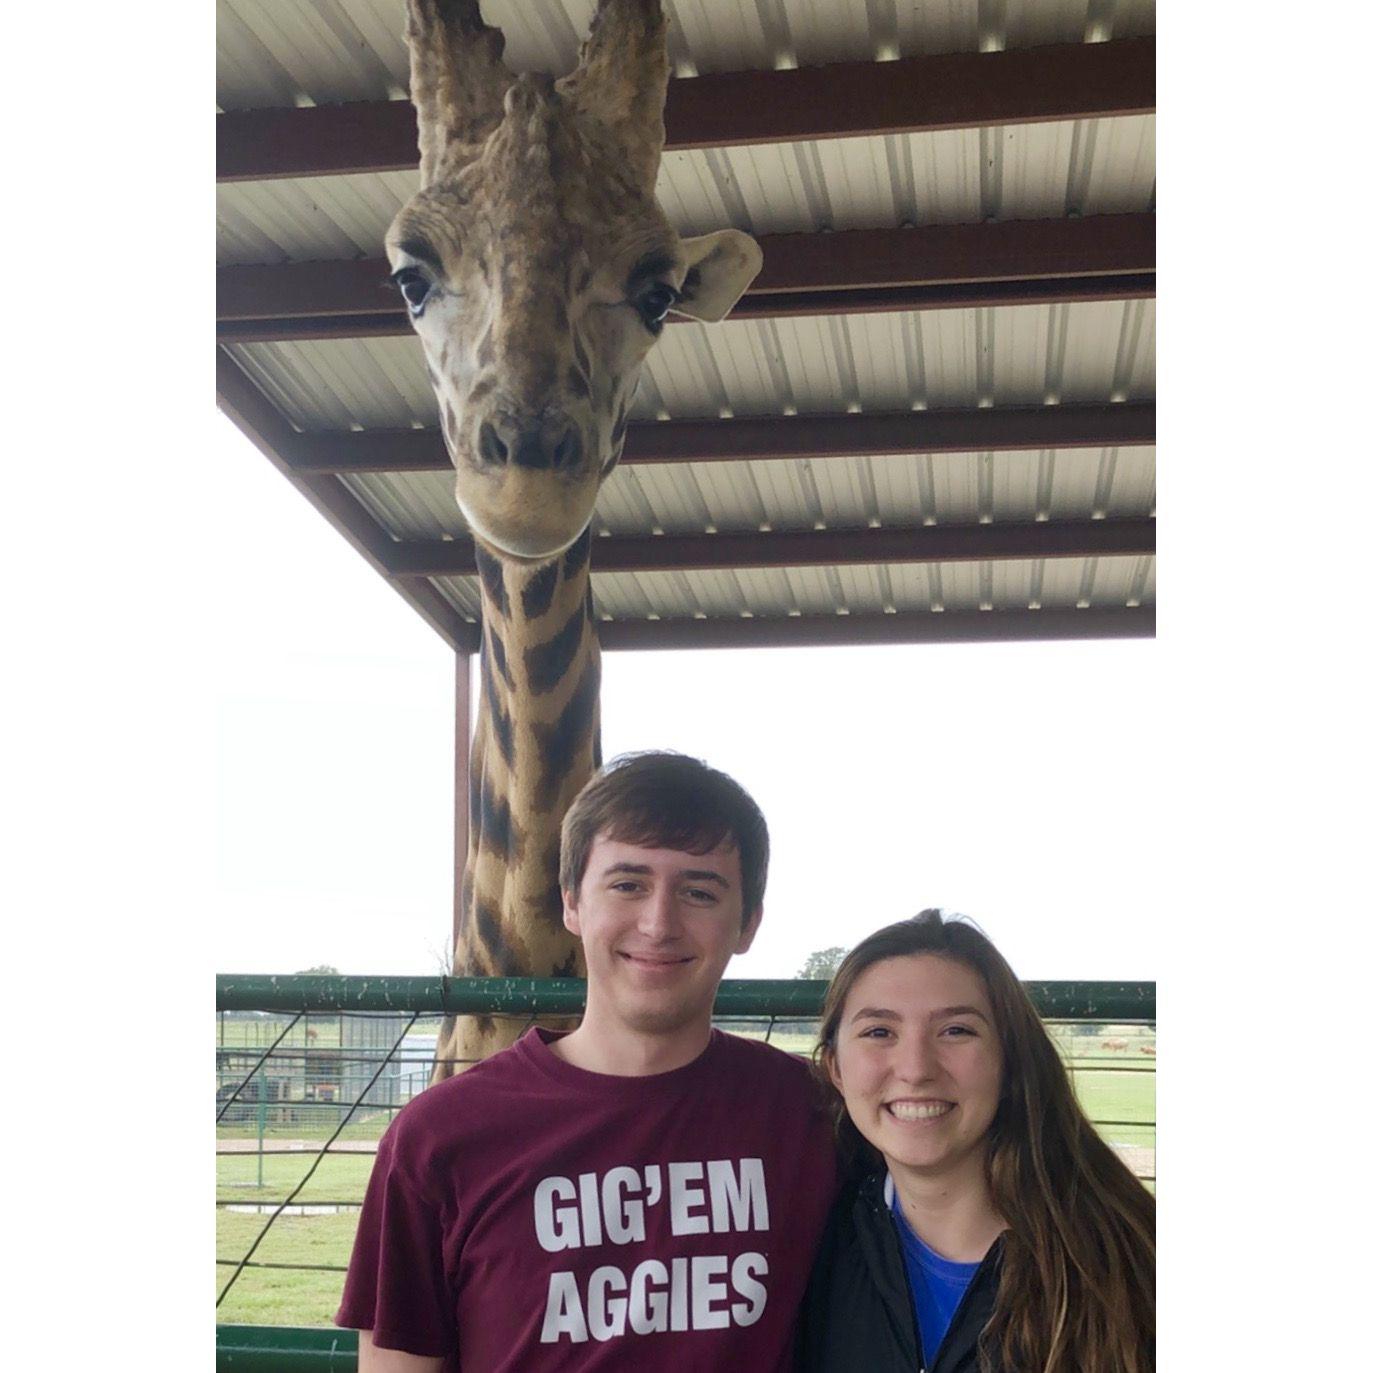 One of our first dates at Aggieland Safari, 2018